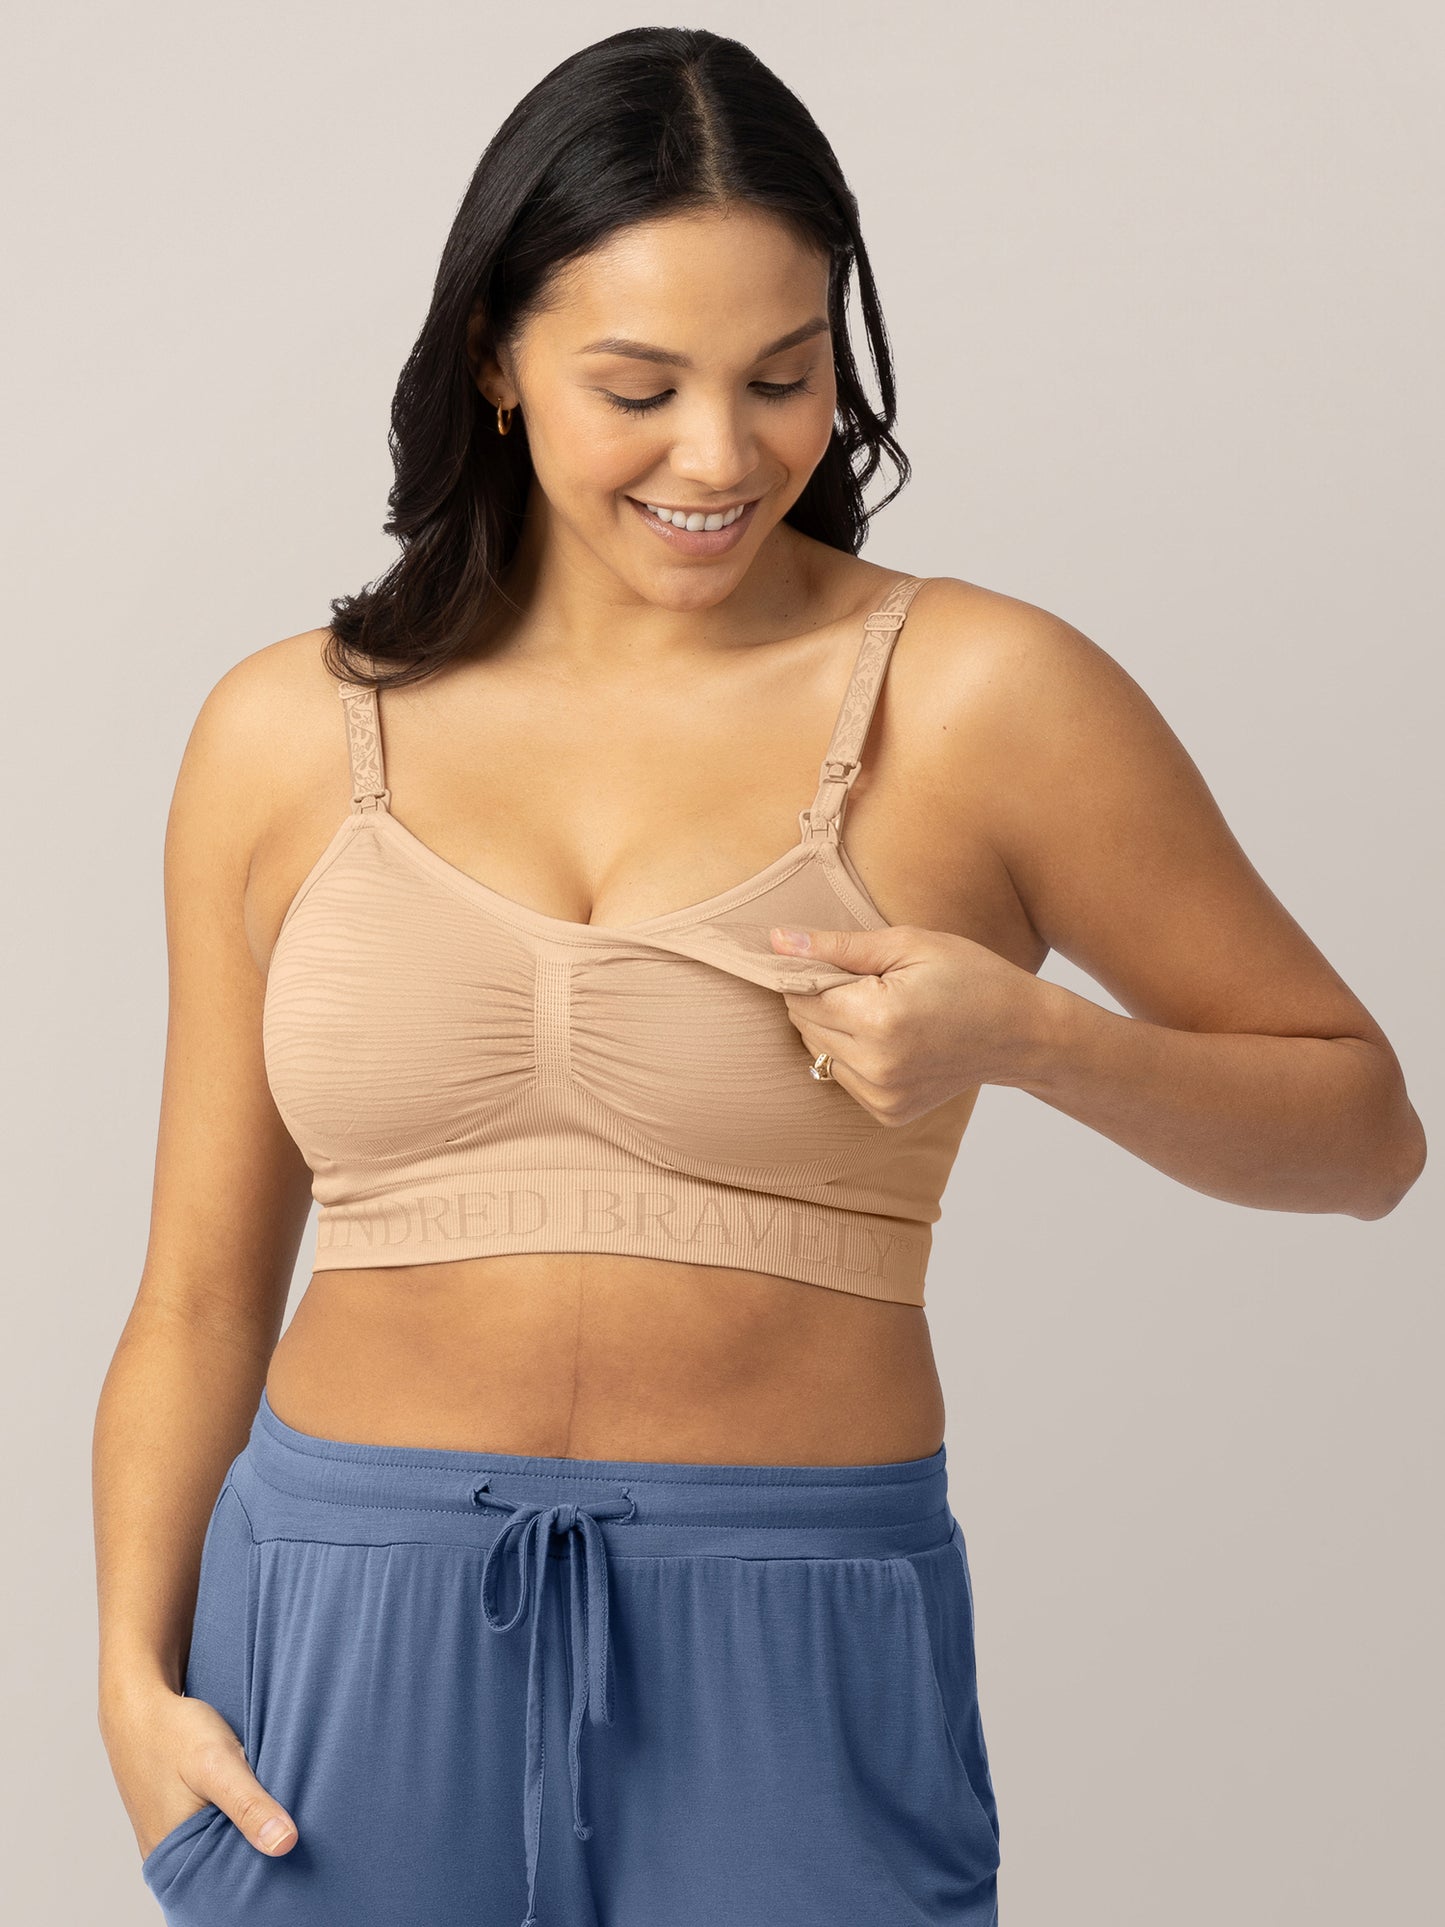 Model wearing the Sublime® Hands-Free Pumping & Nursing Bra in Beige showing the clip down nursing and pumping access